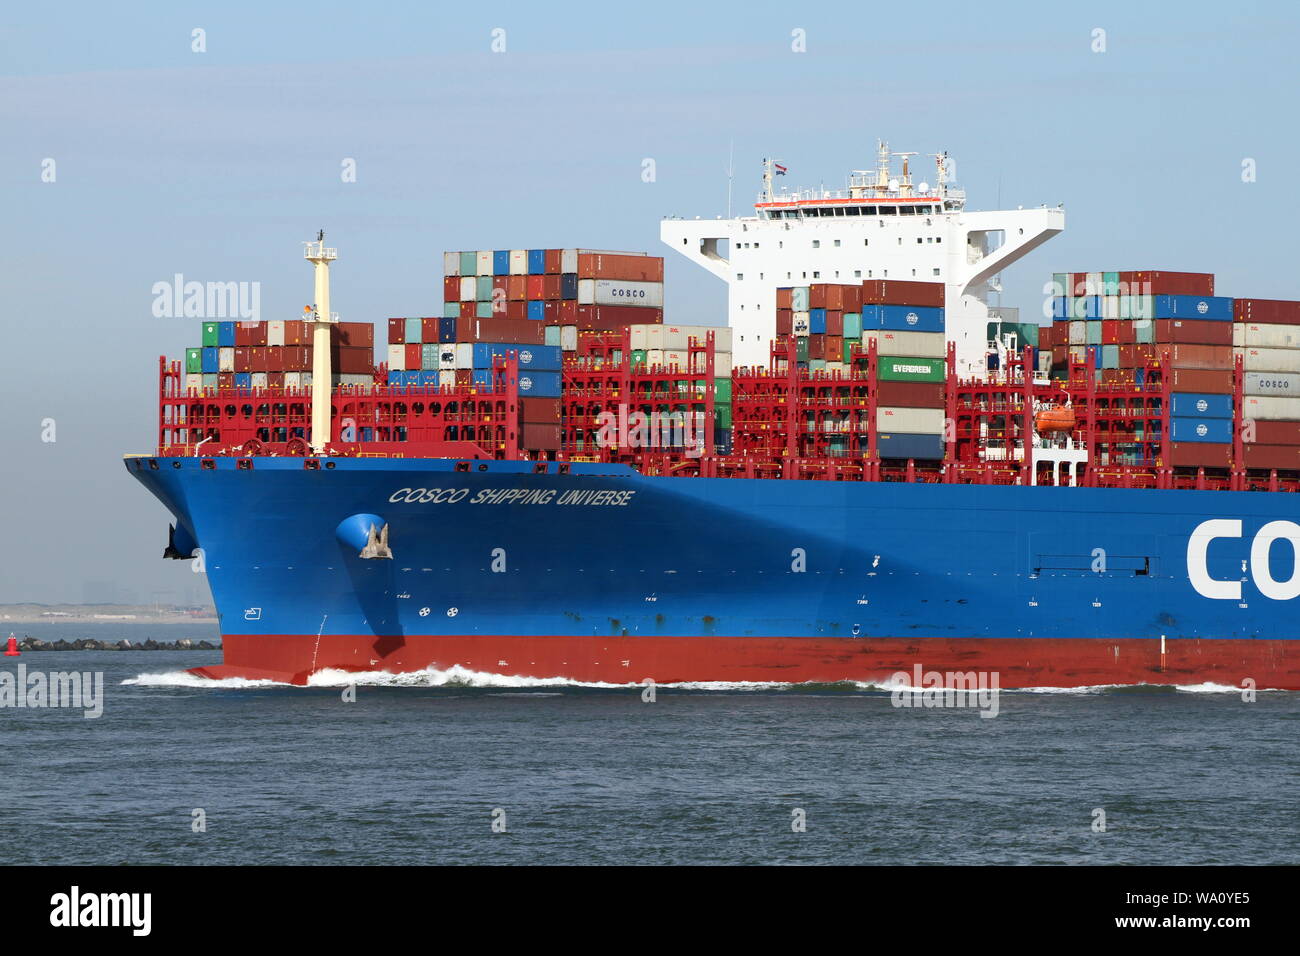 The container ship COSCO Shipping Universe leaves the port of Rotterdam on 22 May 2019. Stock Photo